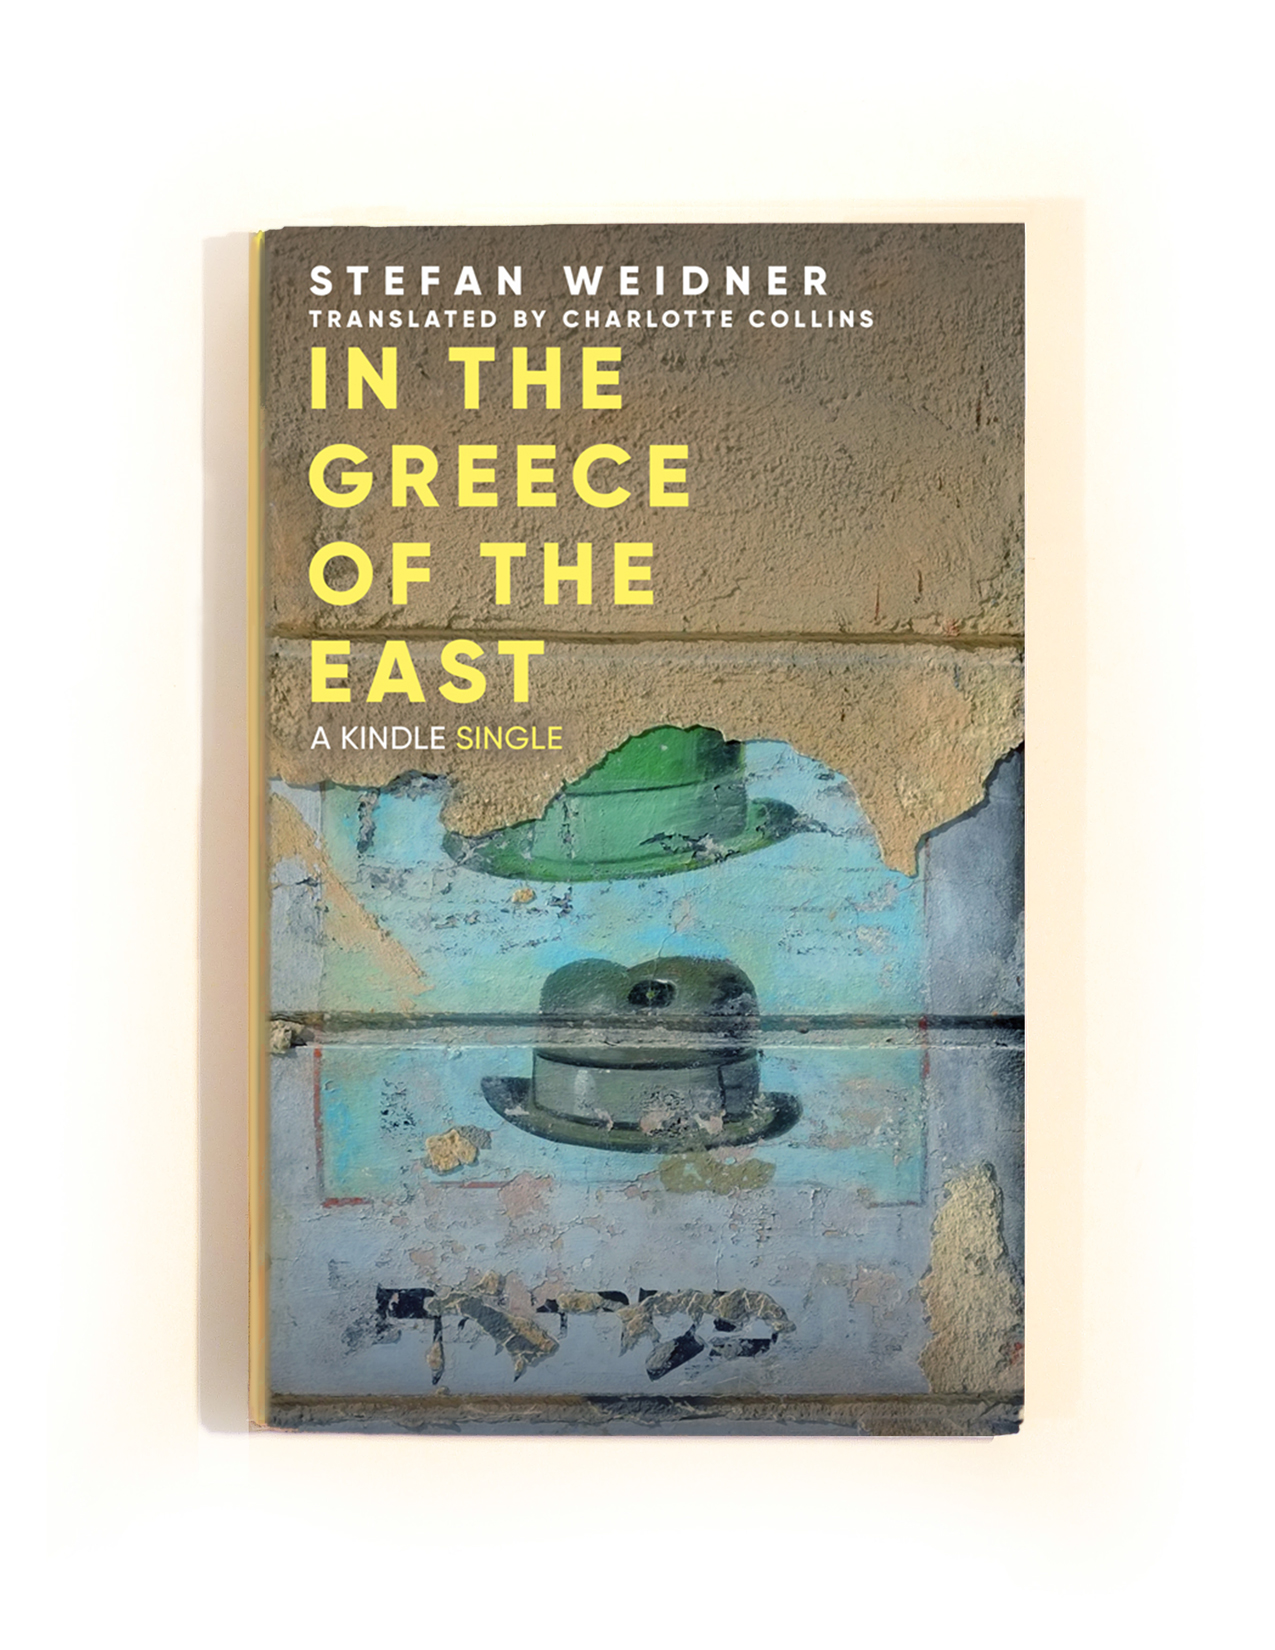 IN-THE-GREECE-OF-THE-EAST-website-book-cover.jpg